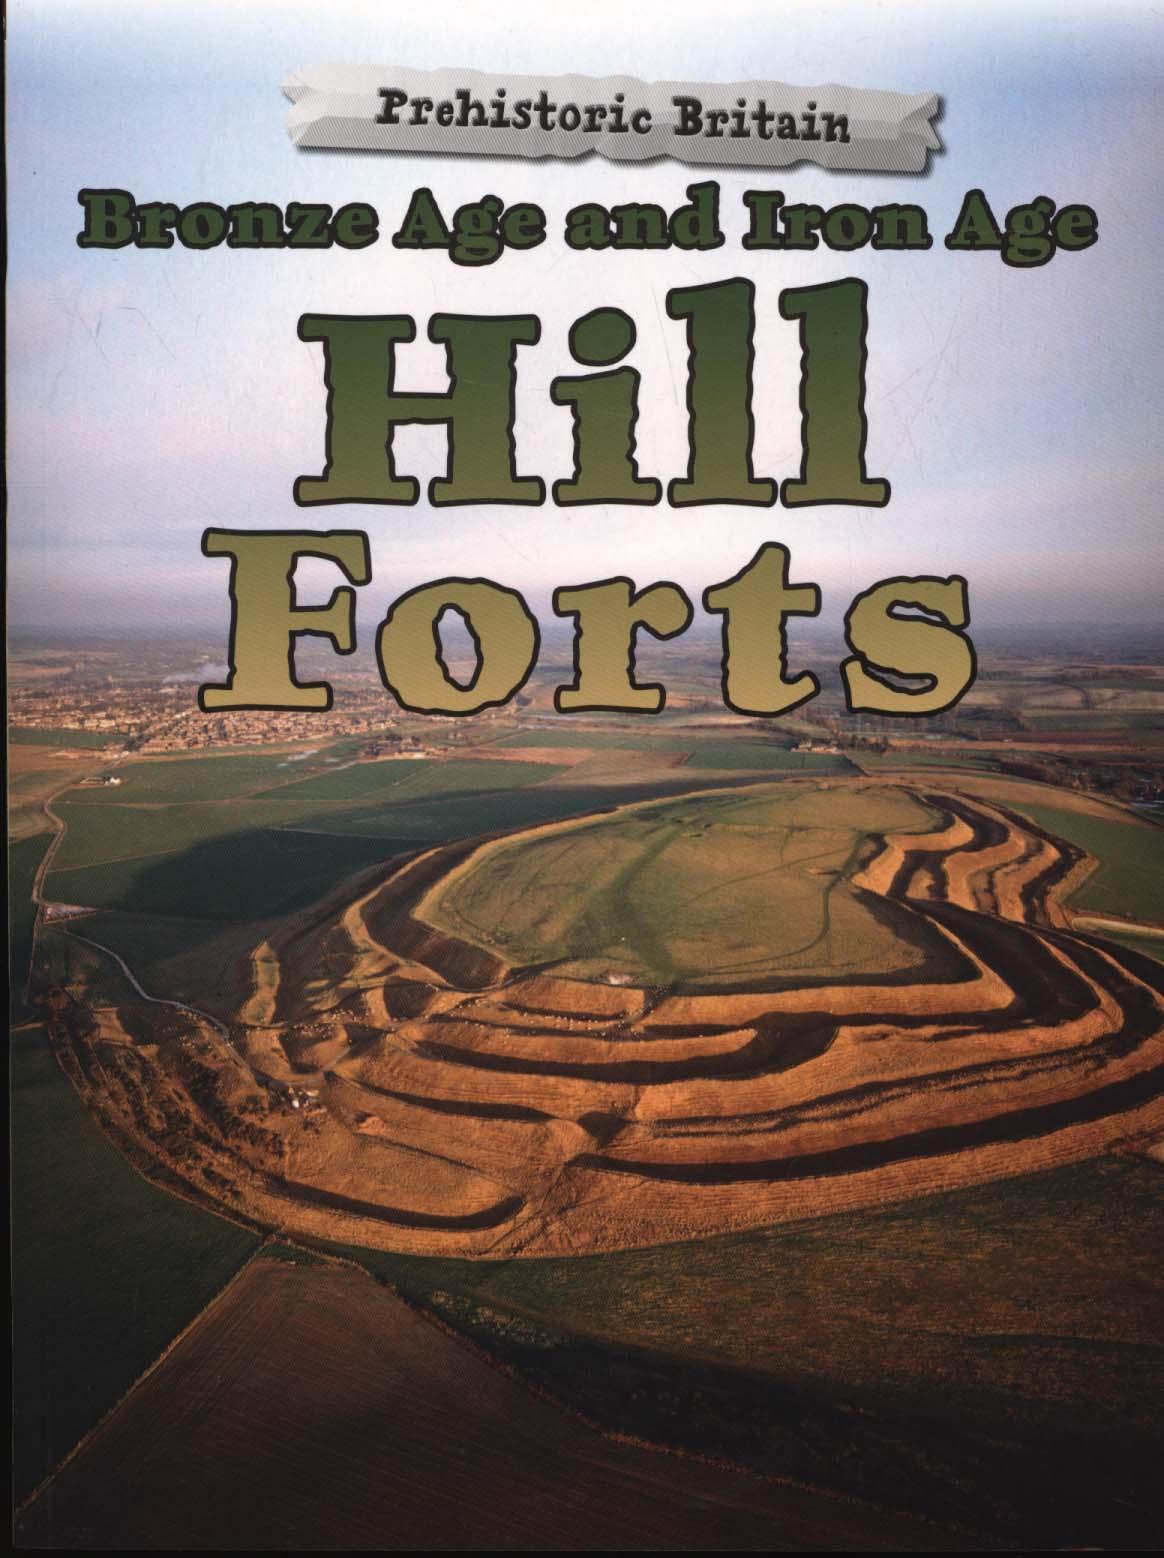 Bronze Age and Iron Age Hill Forts - Dawn Finch